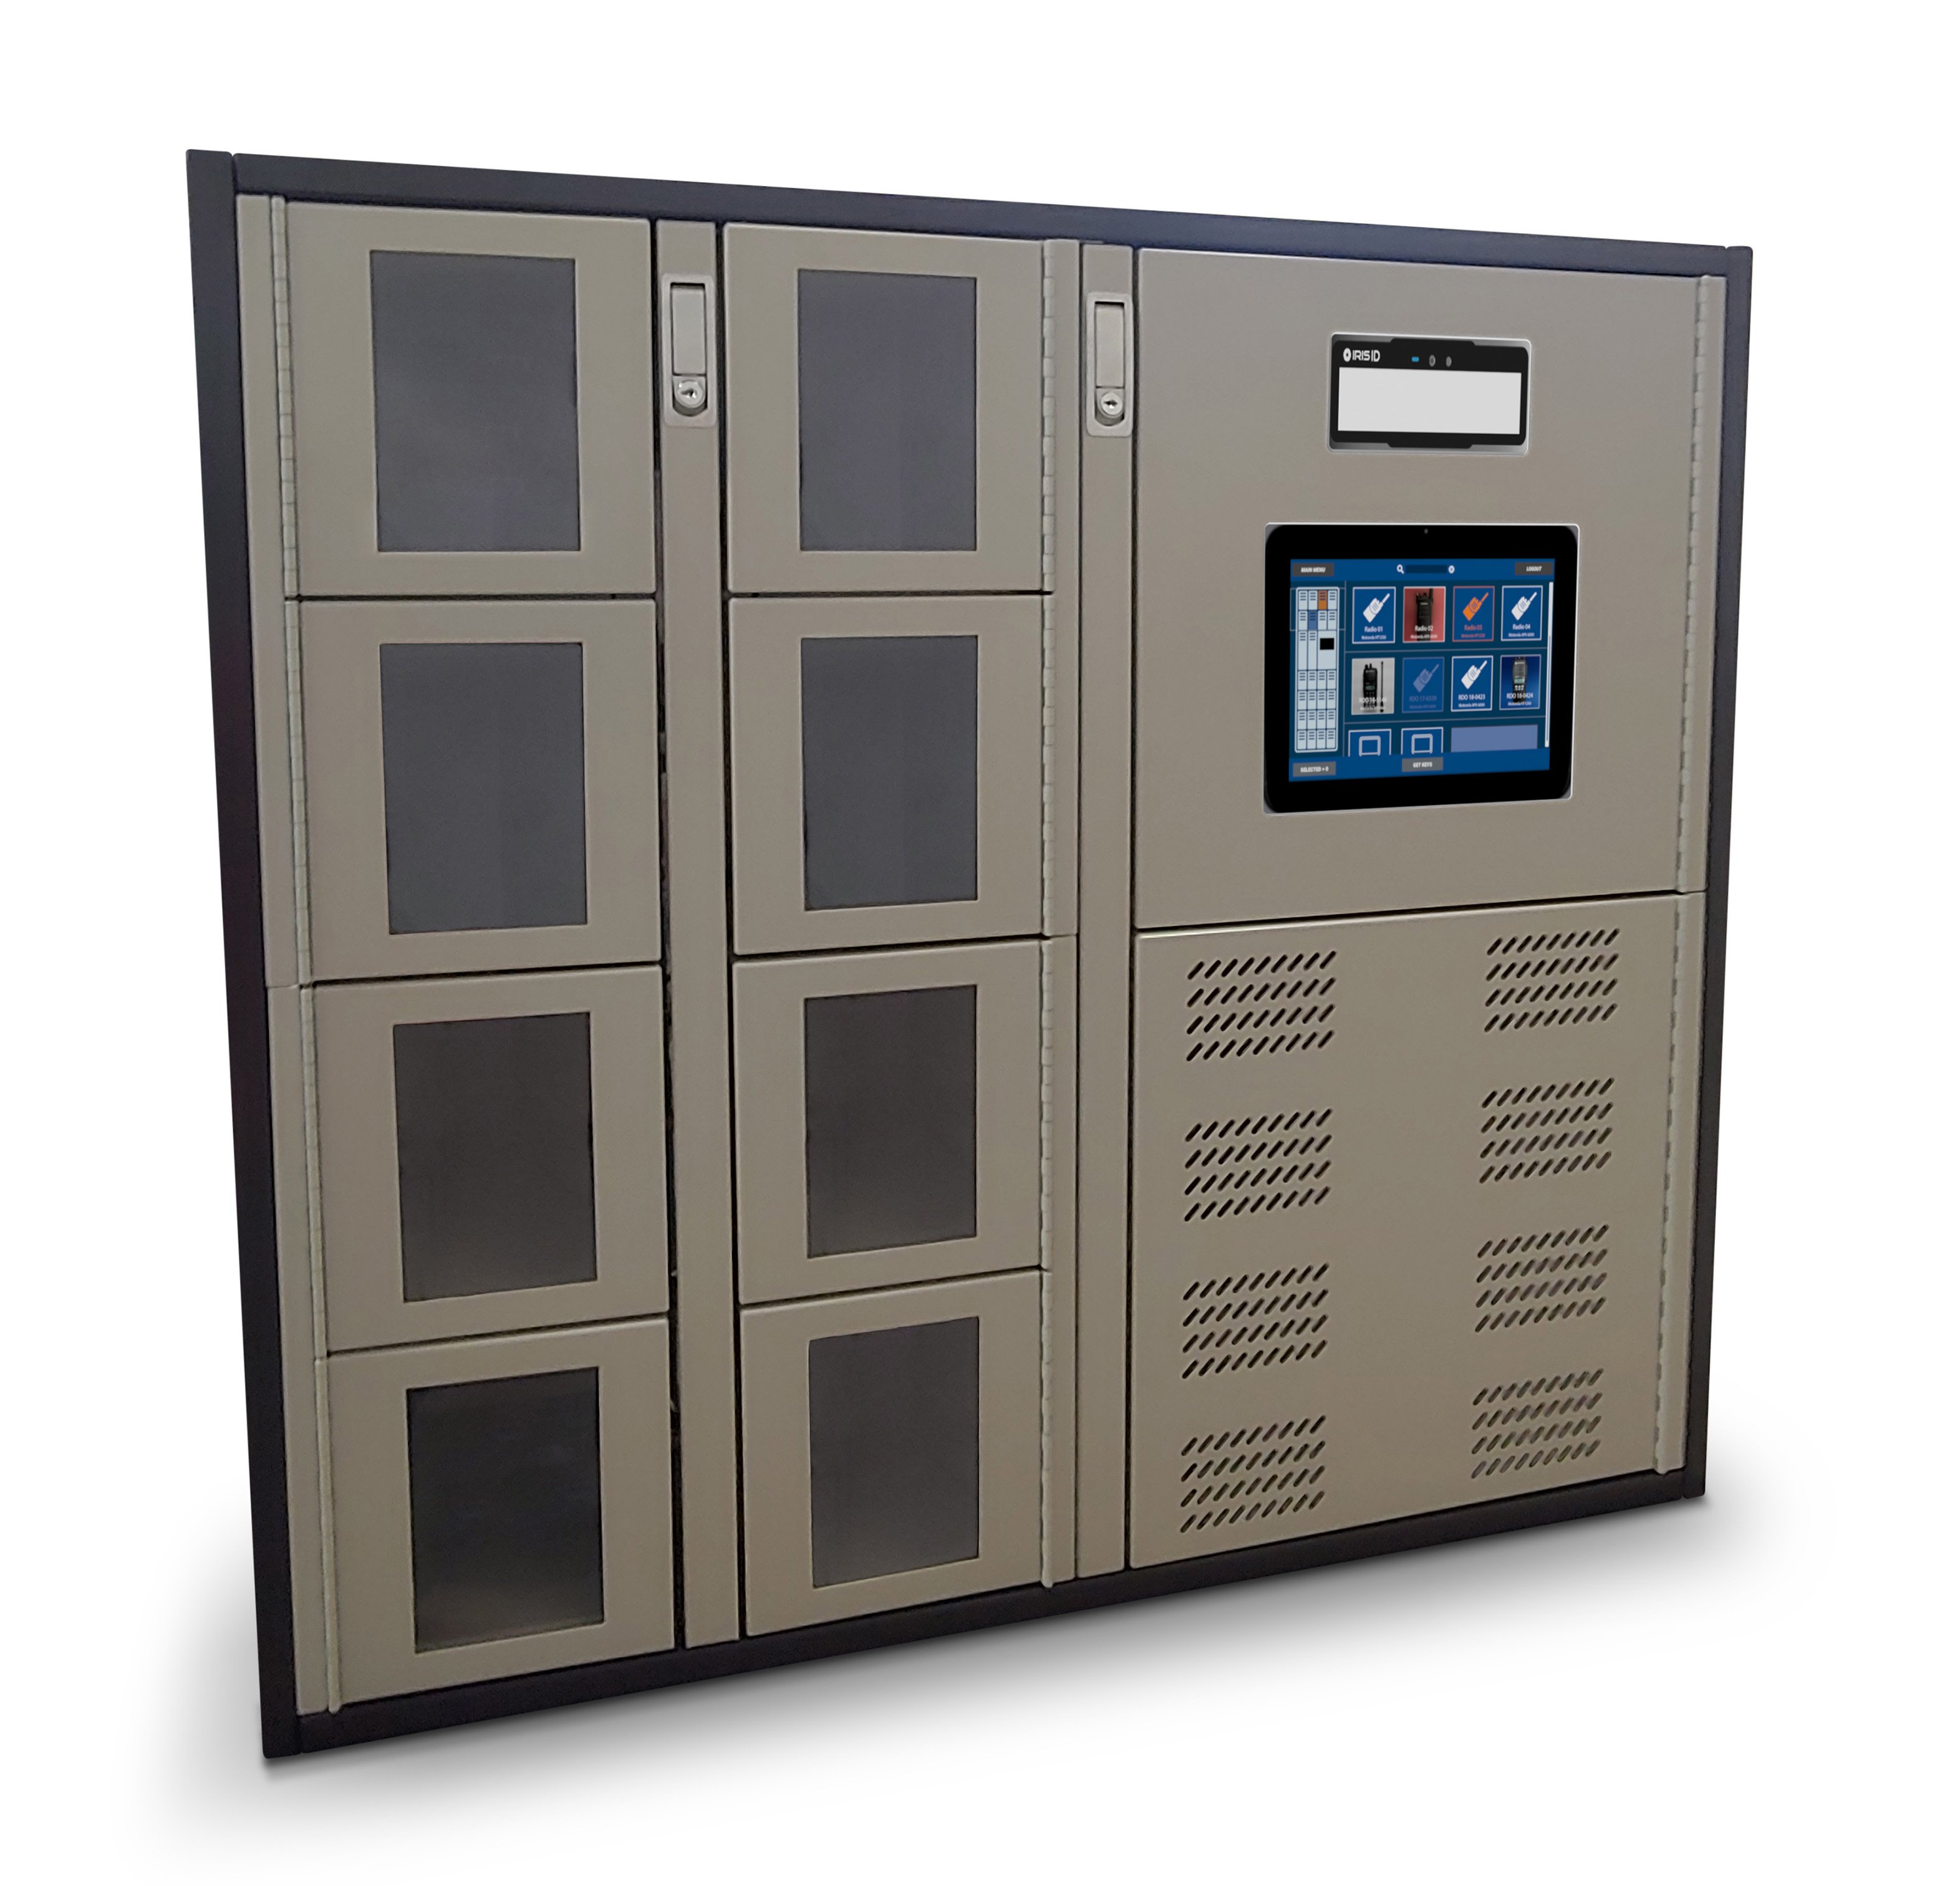 AssetTracer Electronic Asset Lockers